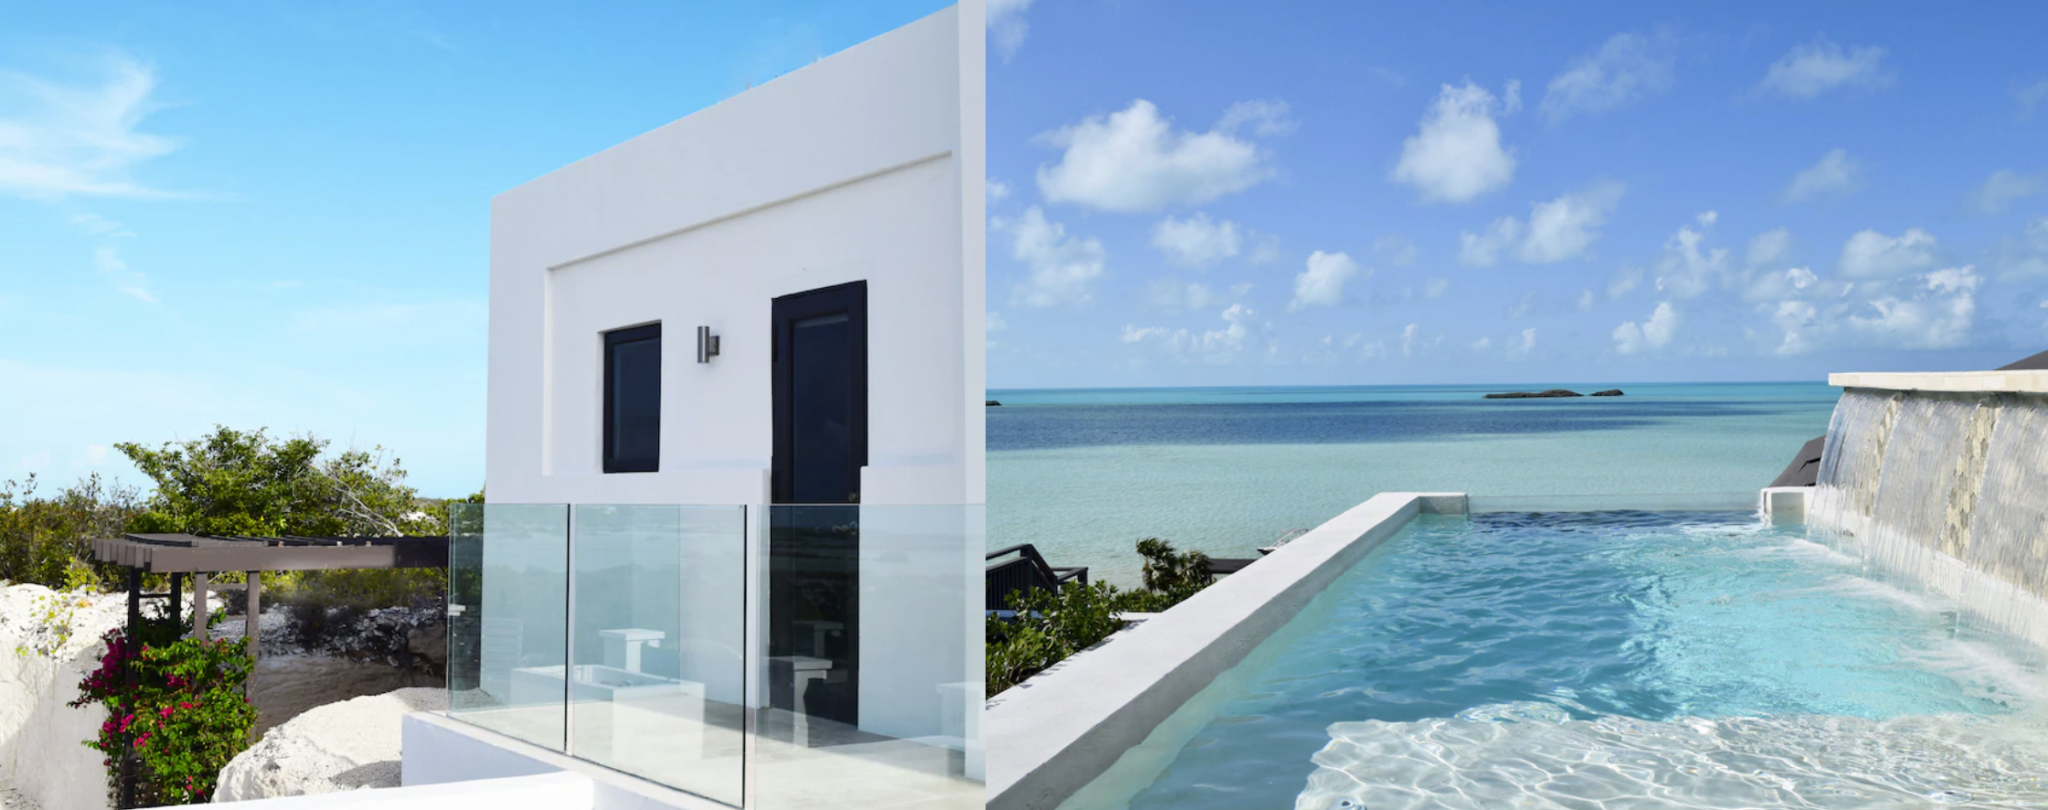 Side by side images show a small Turks and Caicos rental villa. The image on the left shows a small outdoor bedroom balcony, and the image on the right shows the ocean view from the private infinity pool.